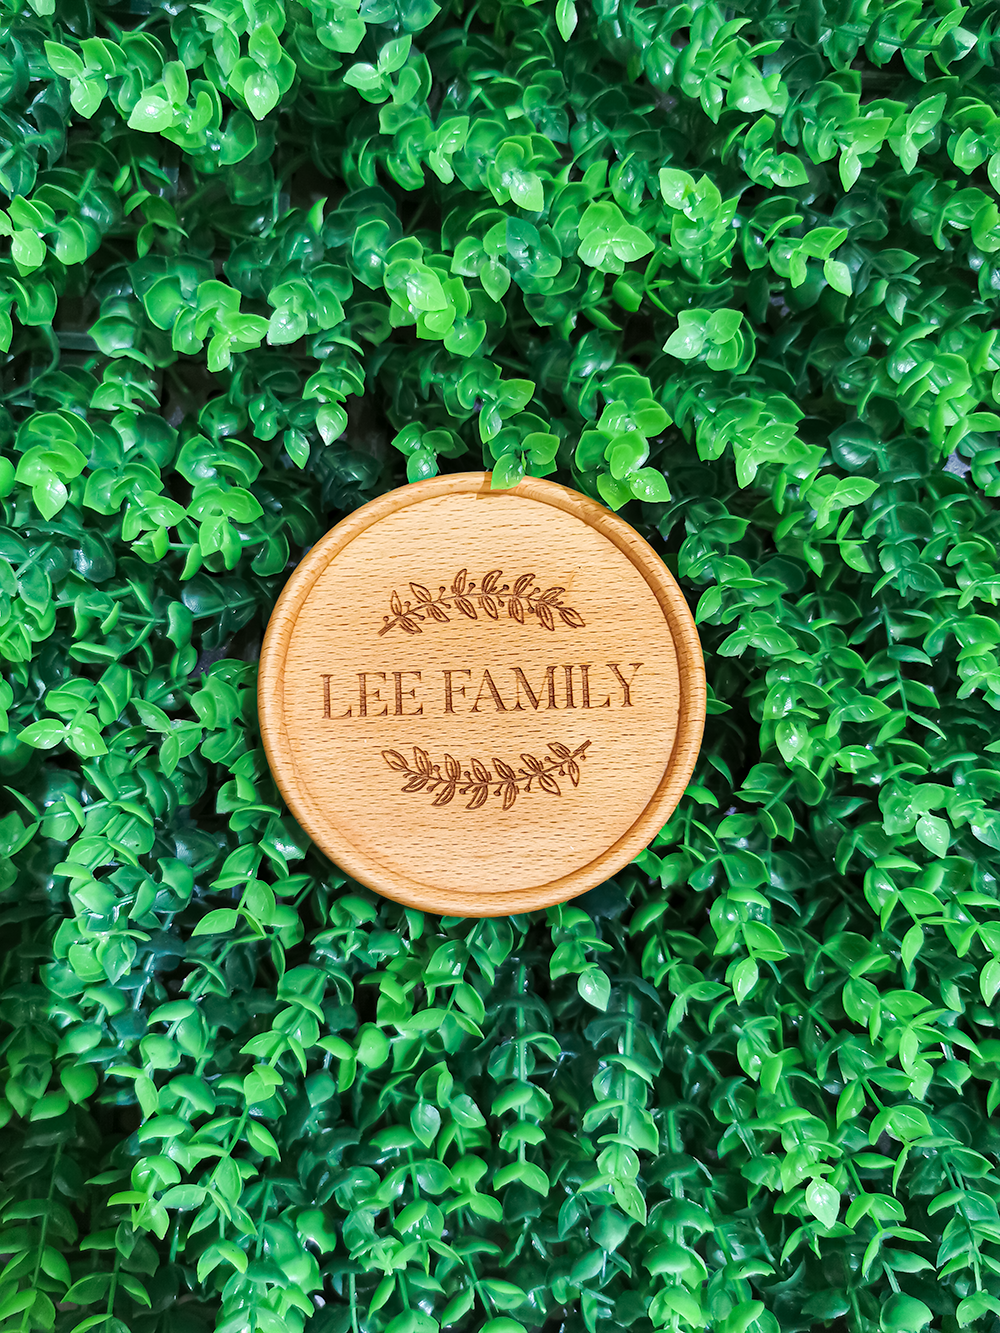 "Lee Family" Wood Coaster - 1 pcs - Gifts by Art Tree